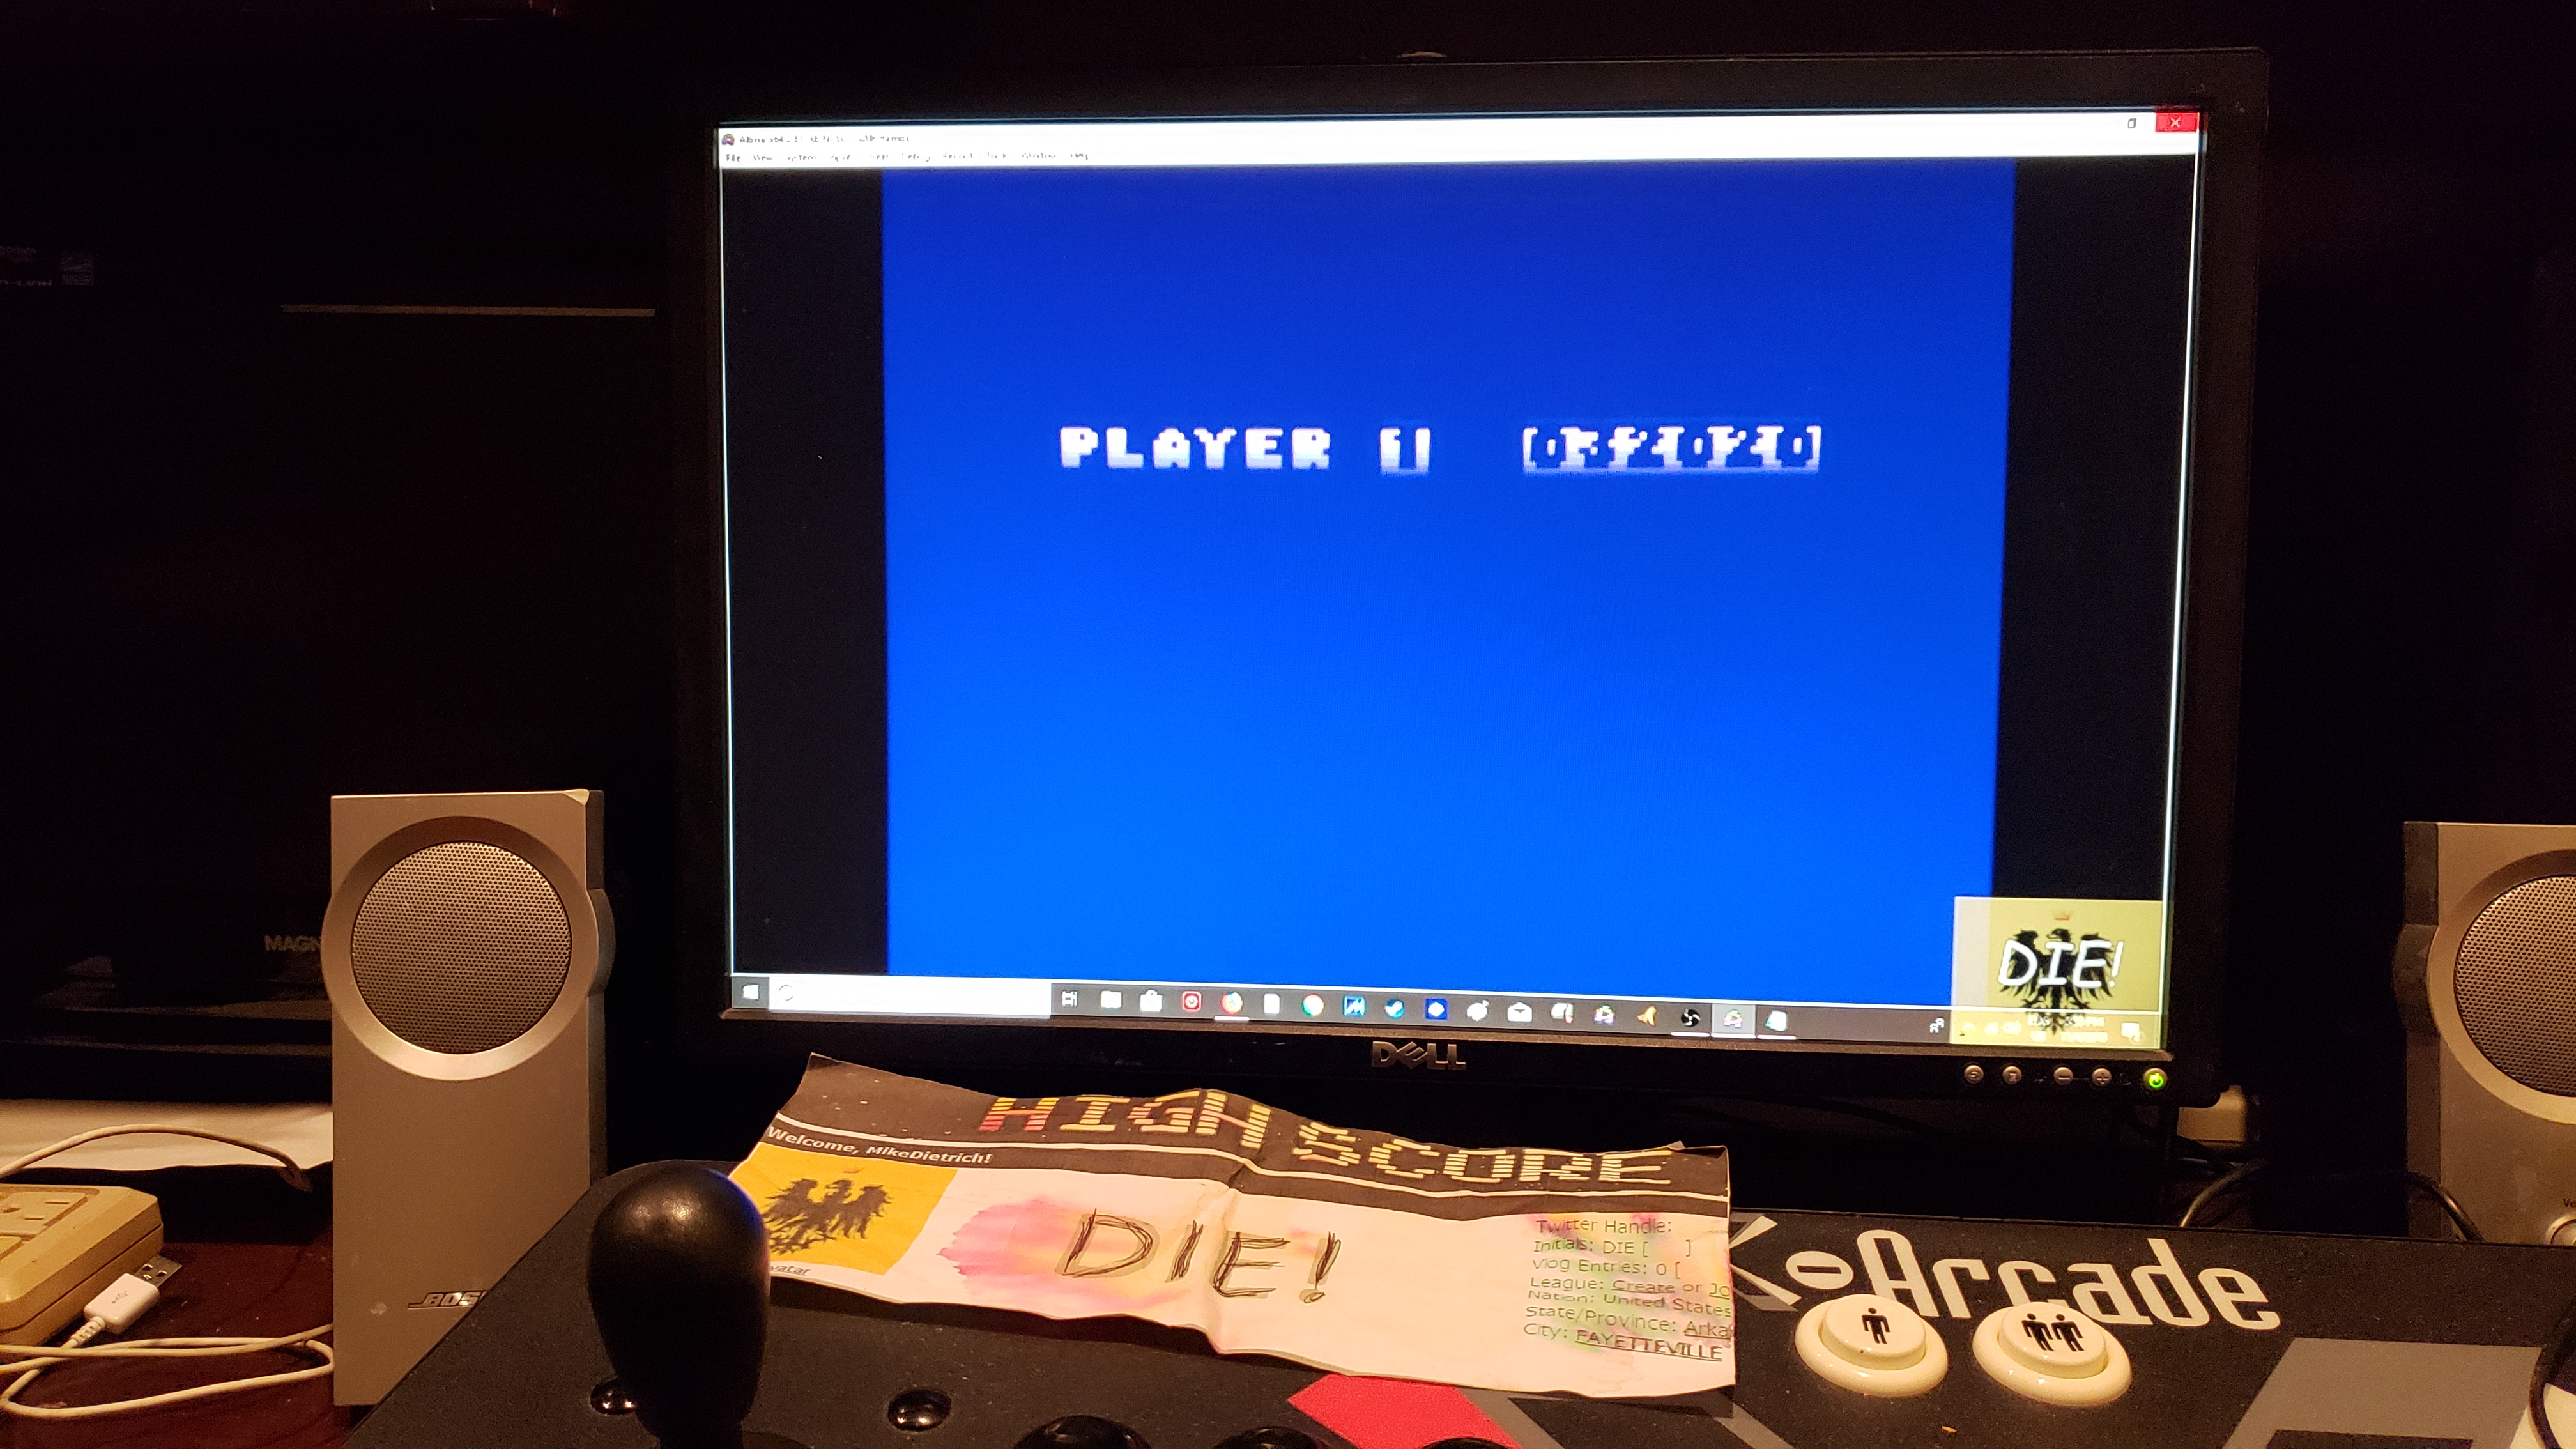 MikeDietrich: Flip and Flop (Atari 400/800/XL/XE Emulated) 32,020 points on 2018-11-04 17:02:49